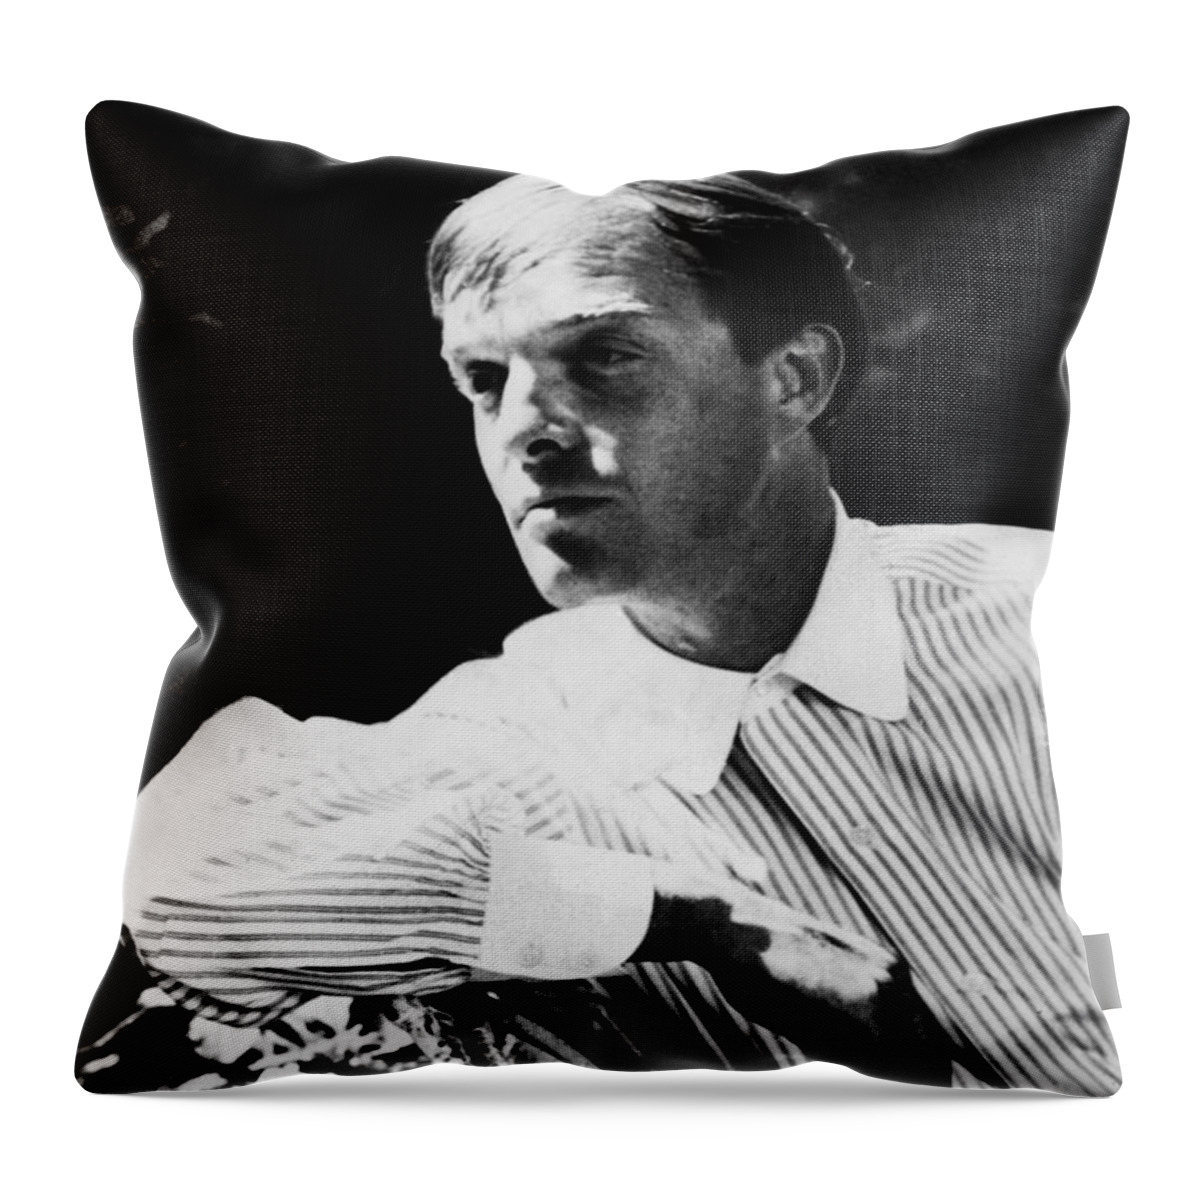 1959 Throw Pillow featuring the photograph Truman Capote (1924-1984) by Granger